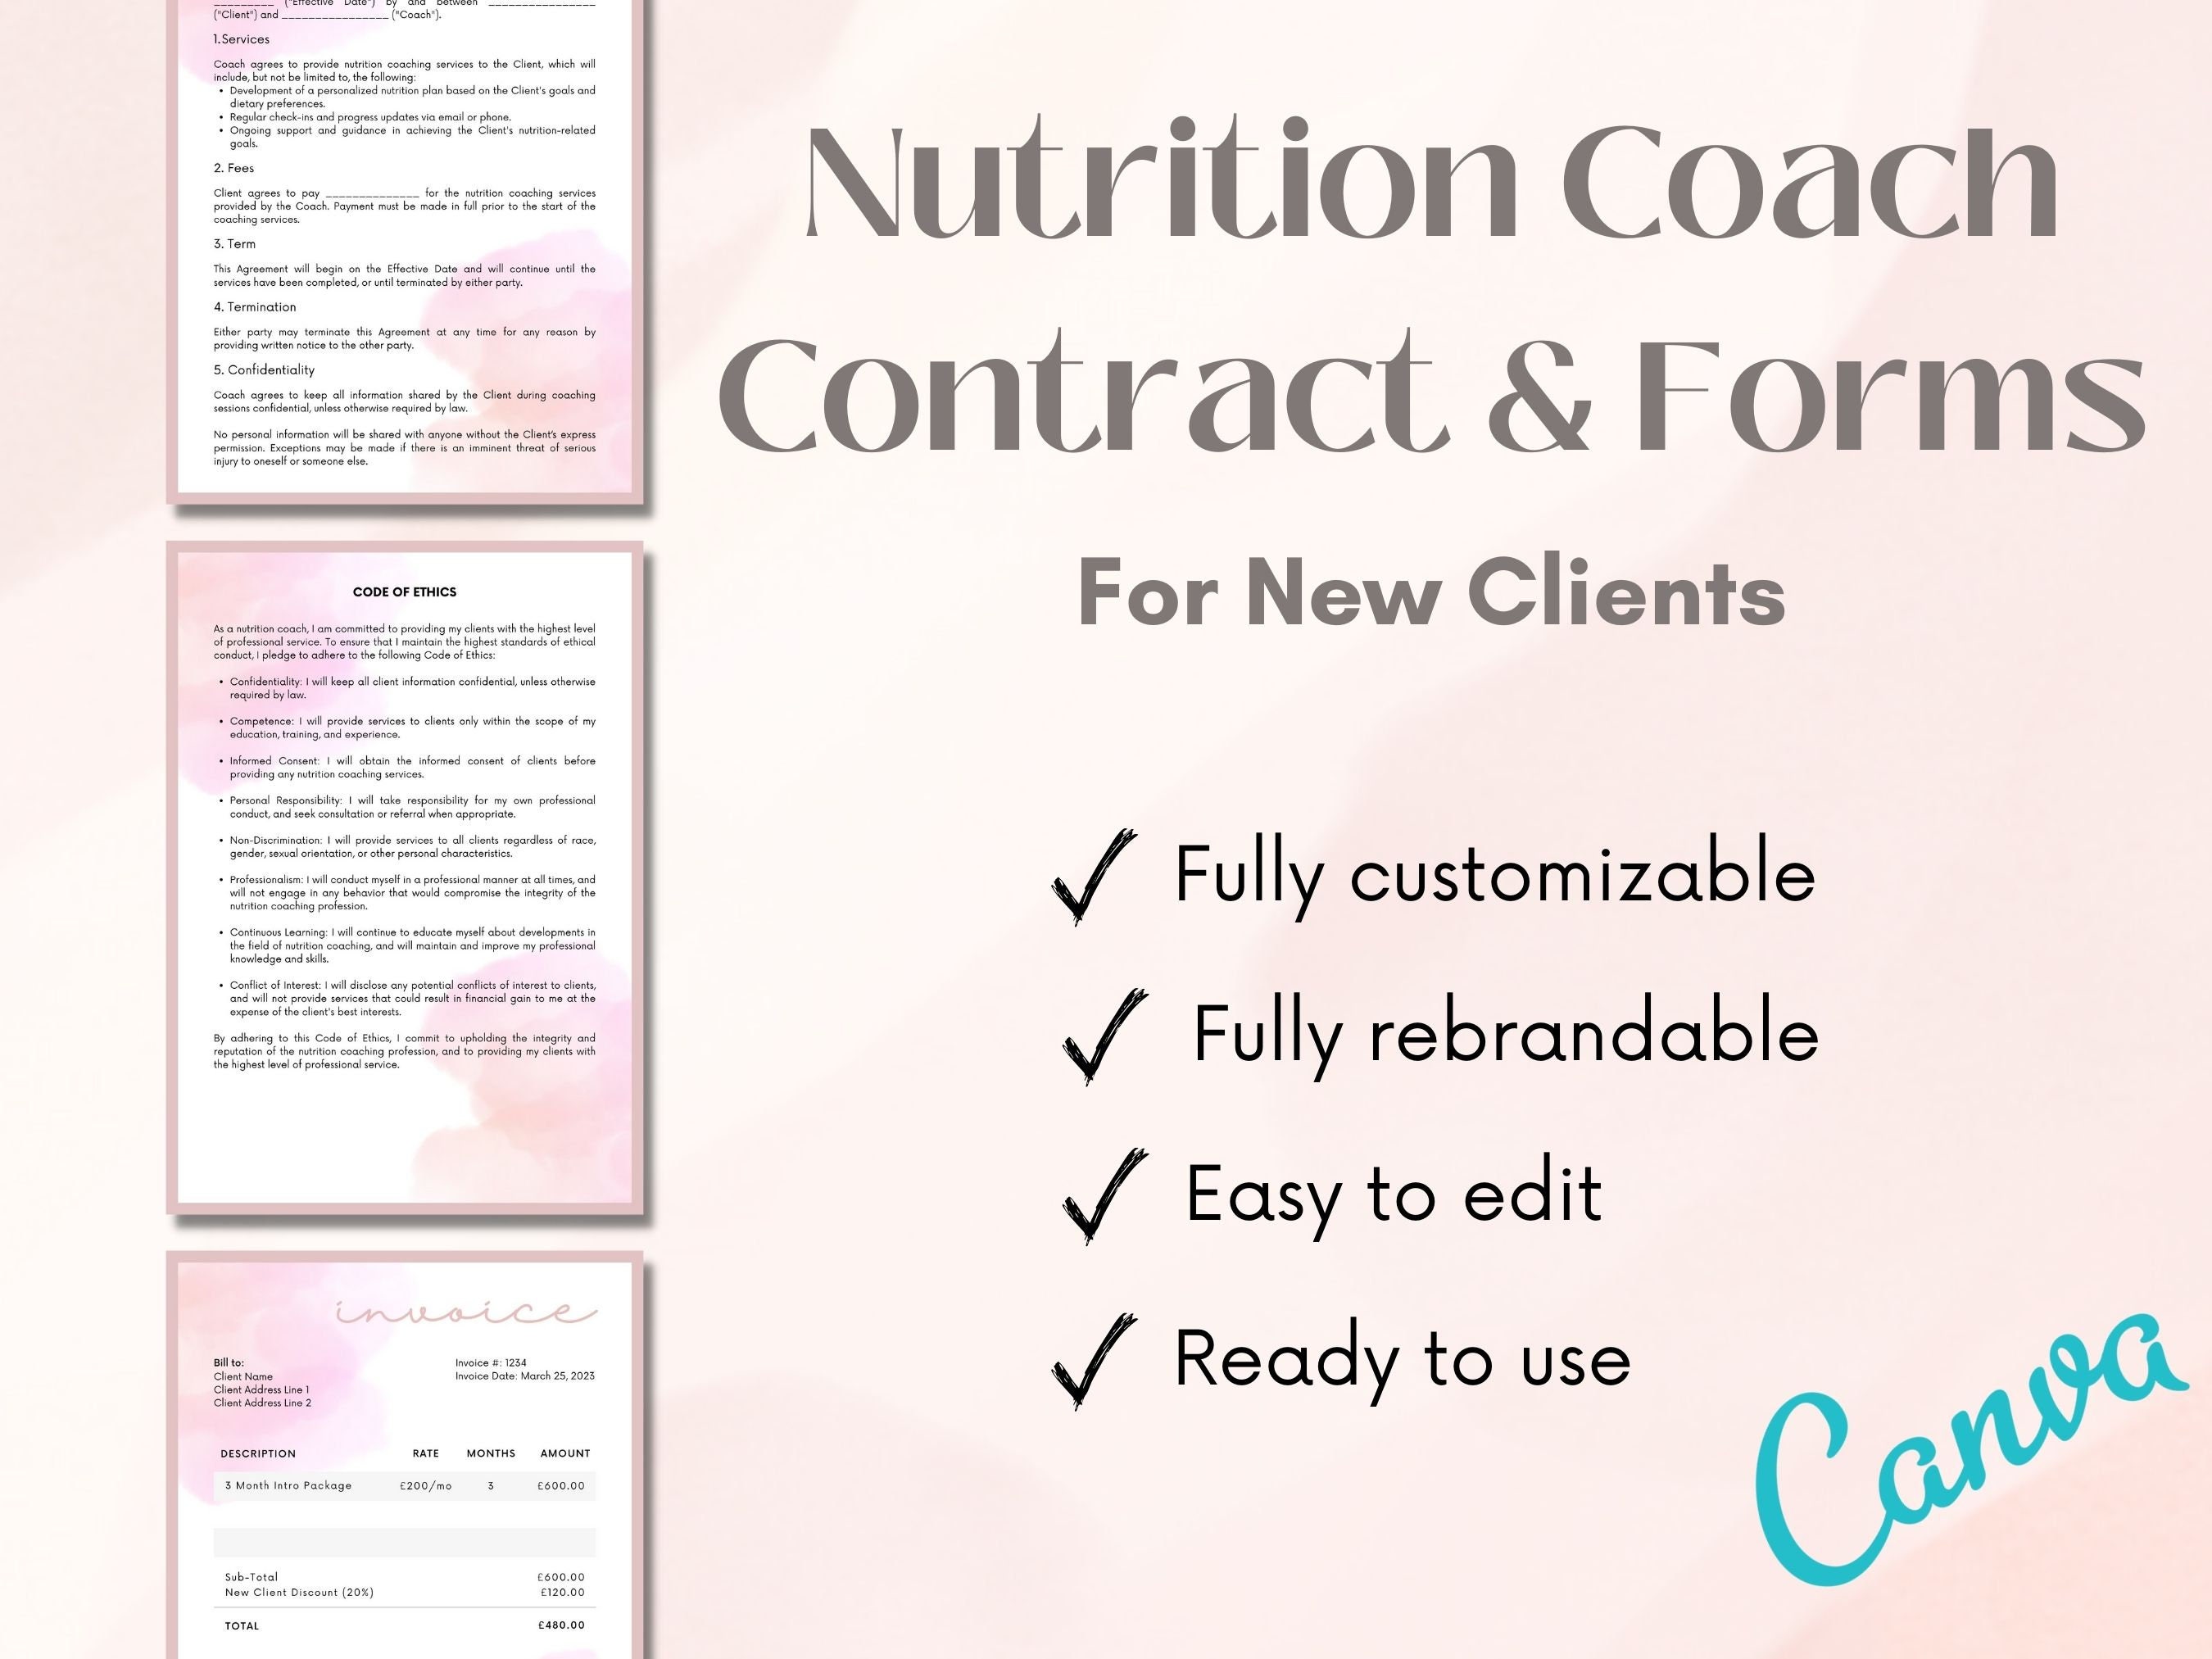 Client Agreement for Health Coaches